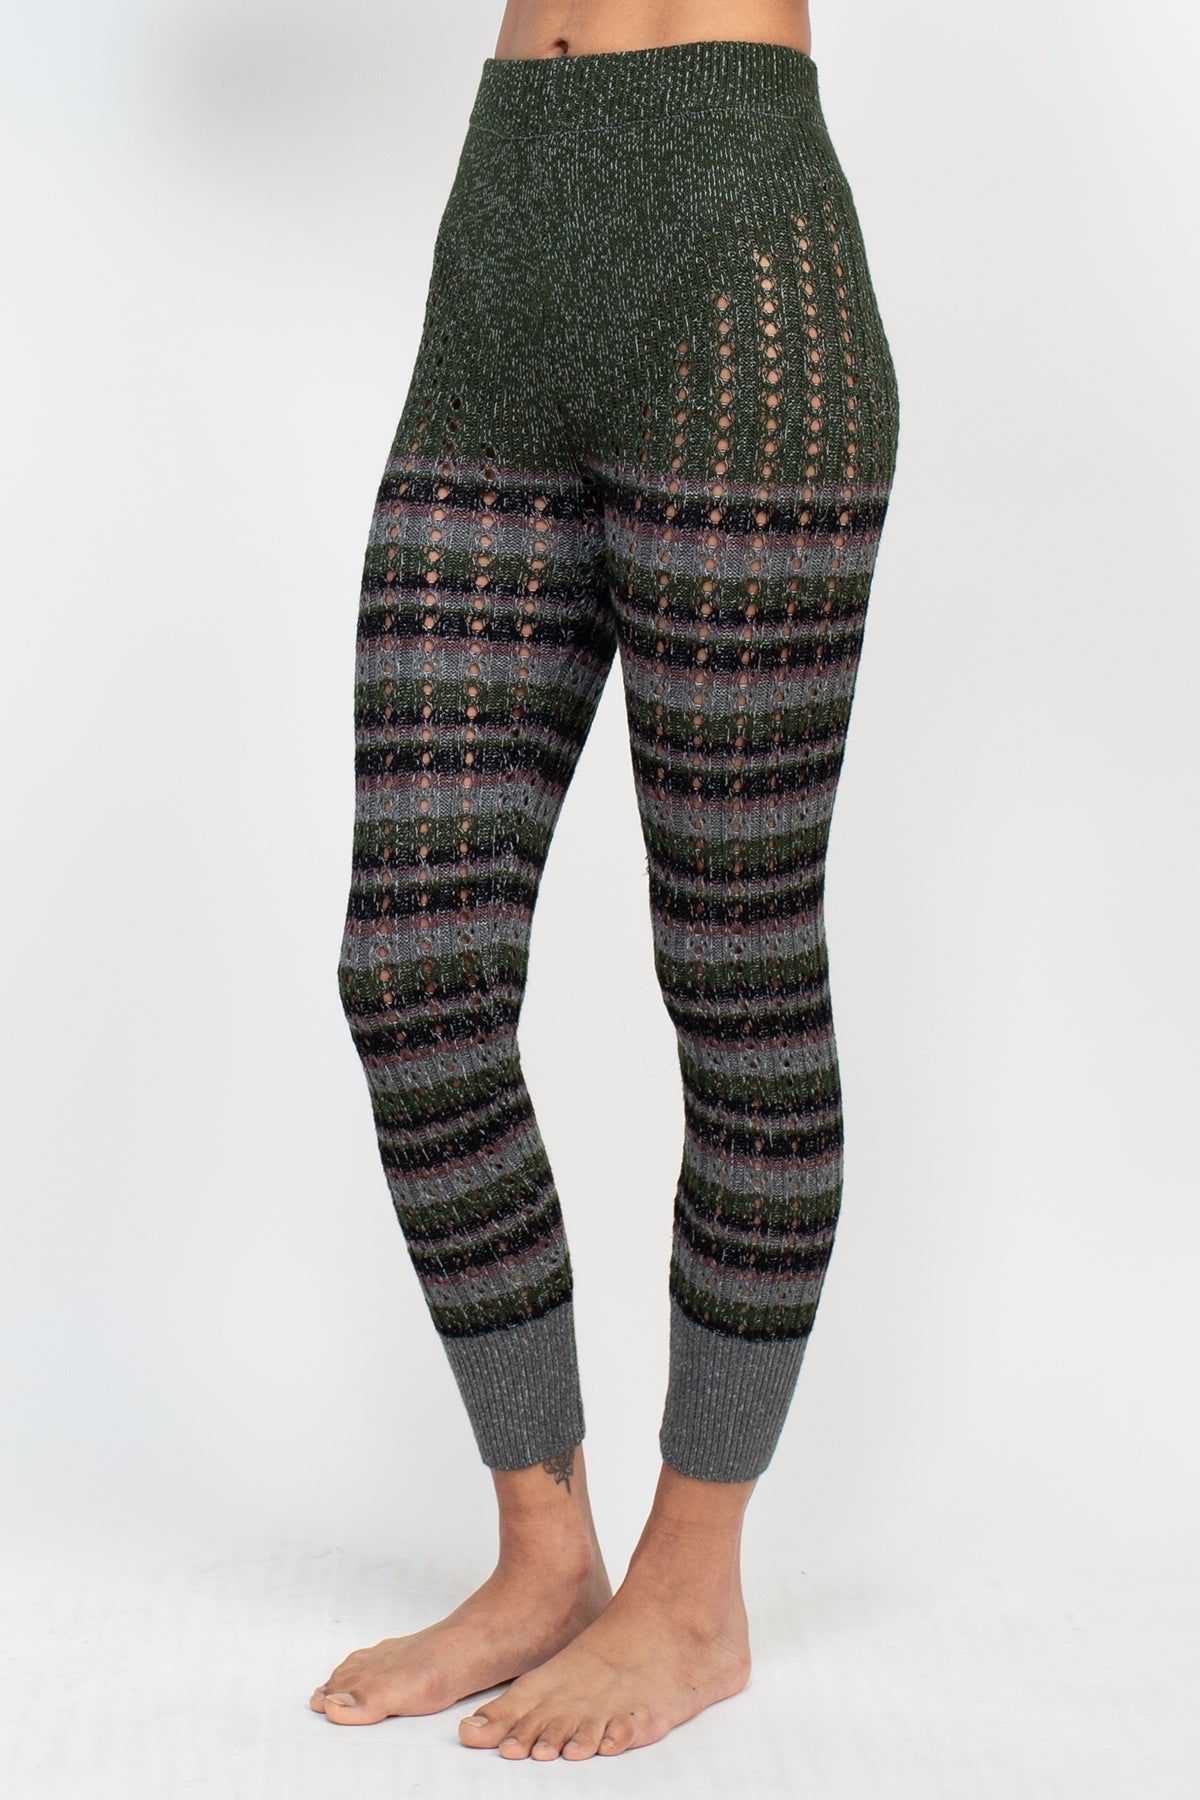 Soft and Stylish Lacy Knit Leggings - Perfect for Fall and Winter Tights –  Lakhay-Retail